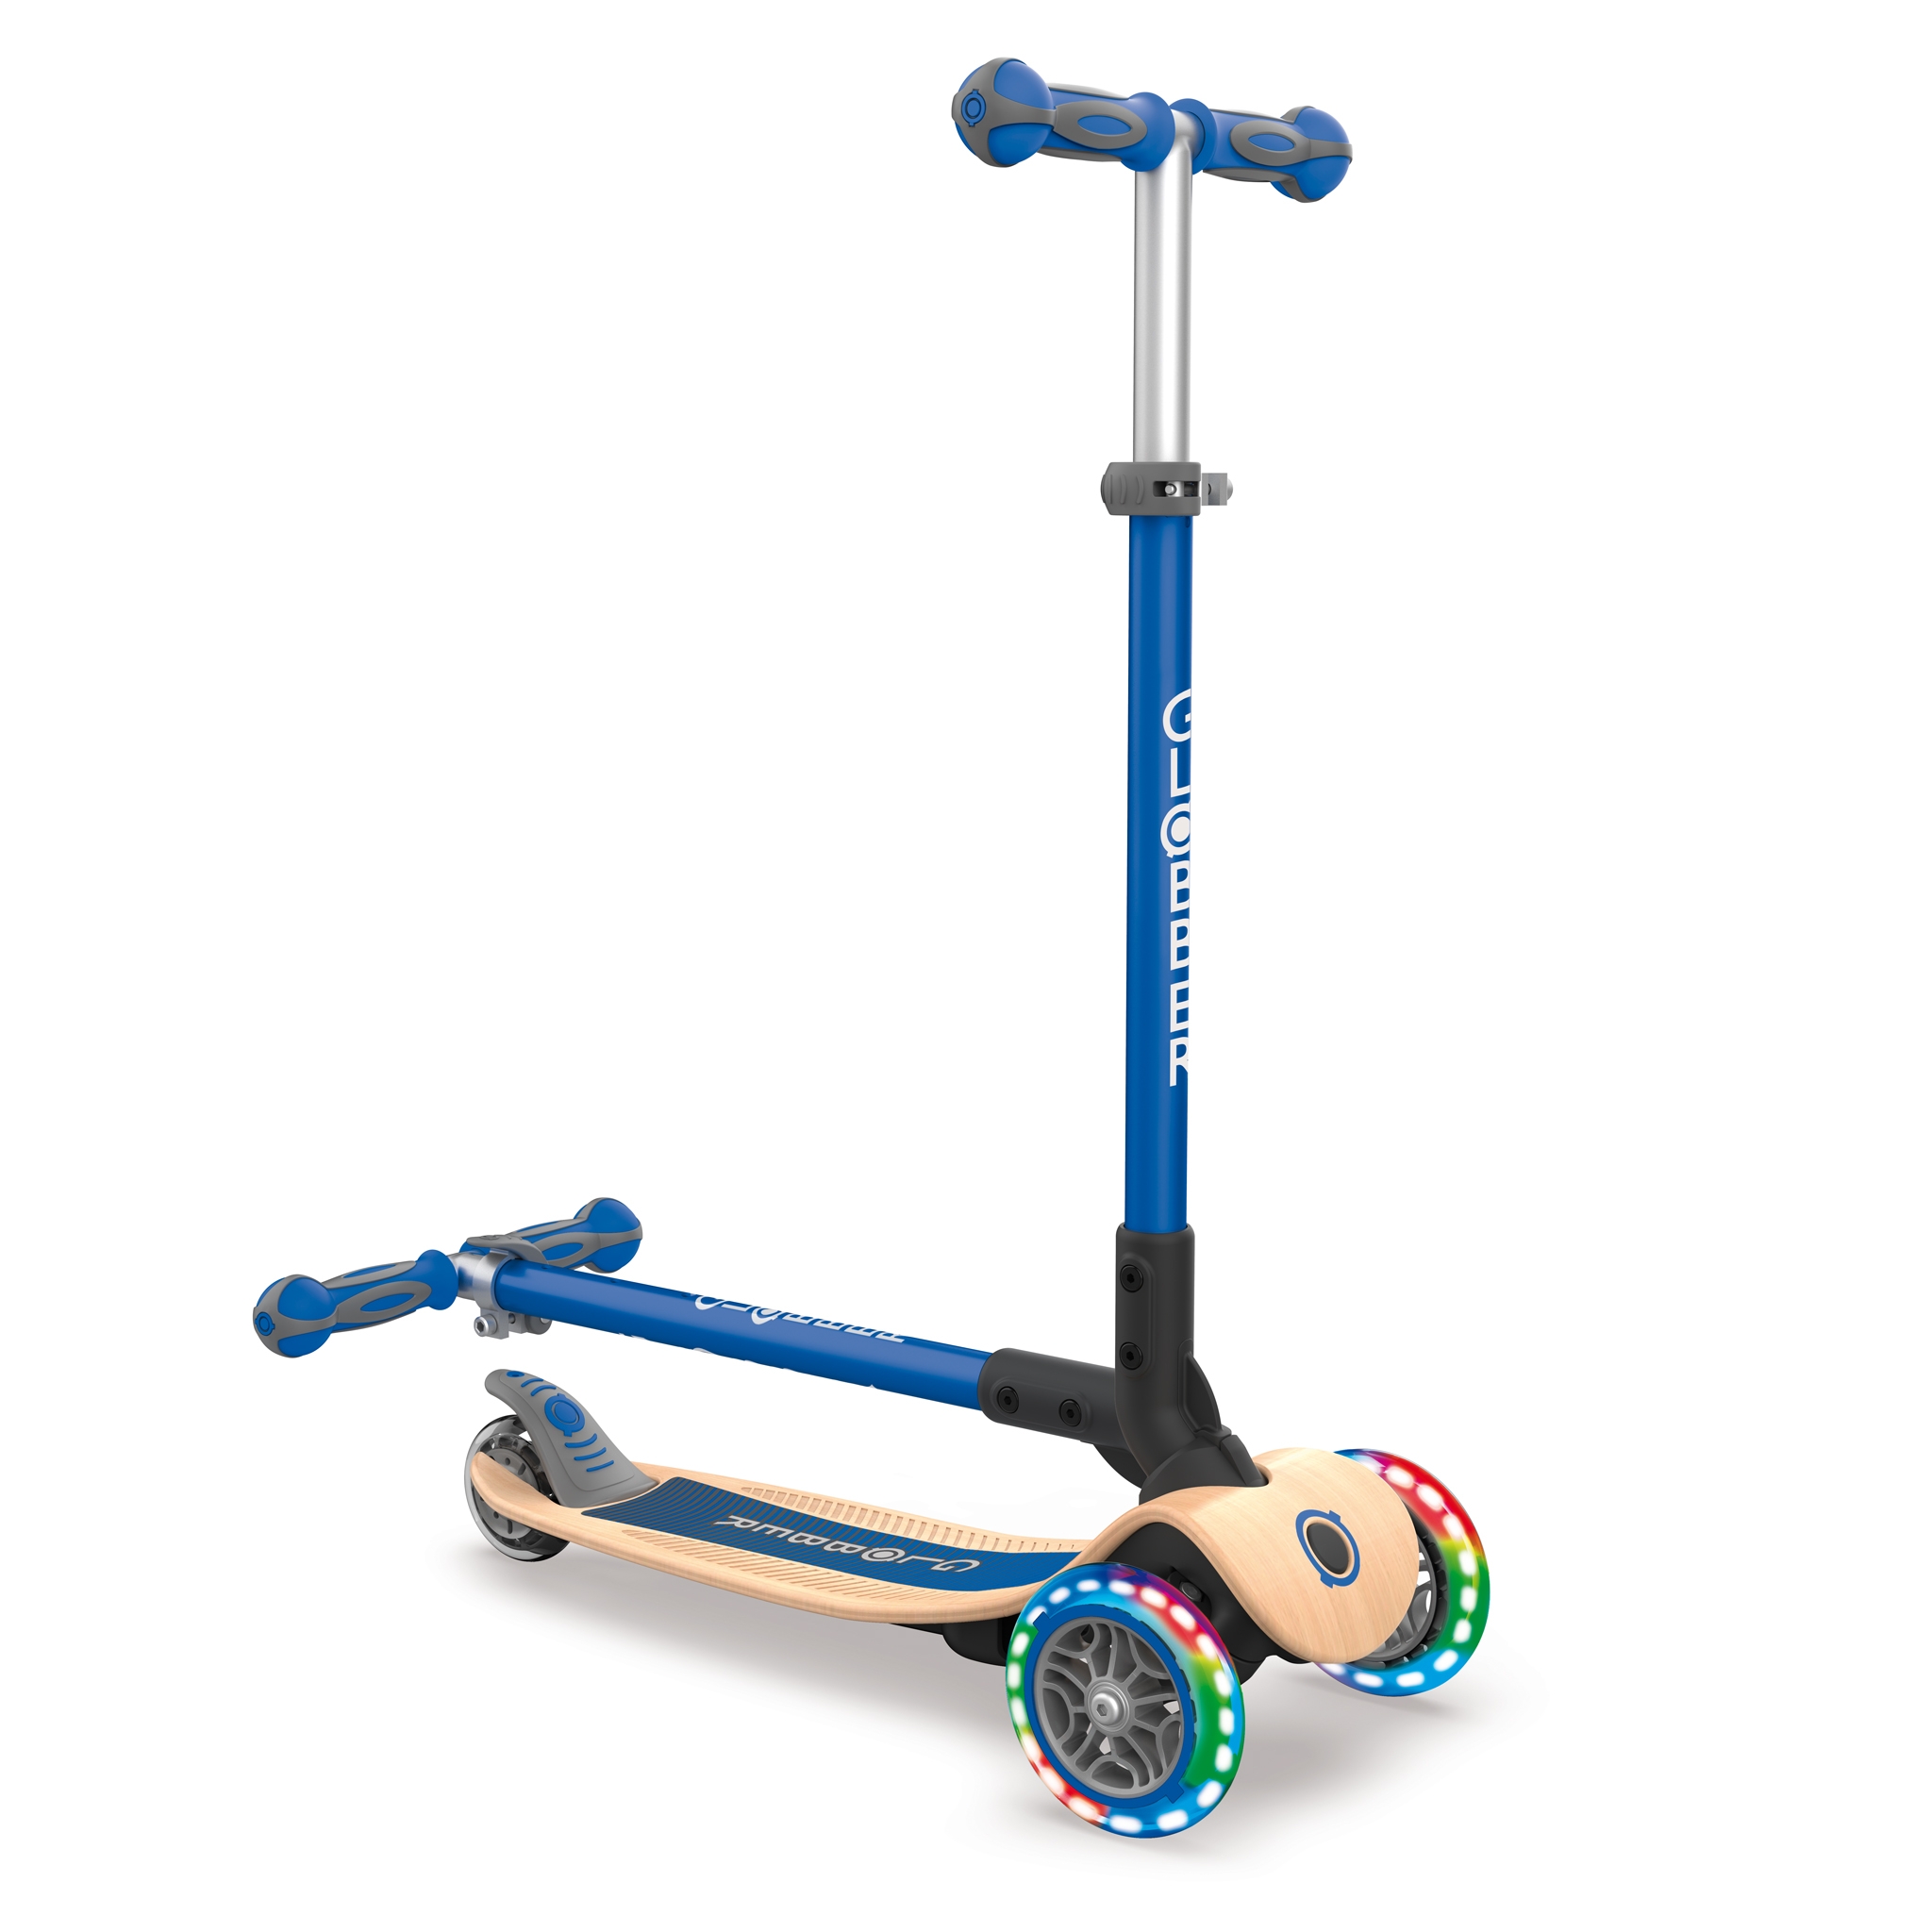 PRIMO-FOLDABLE-WOOD-LIGHTS-3-wheel-foldable-scooter-with-7-ply-wooden-scooter-deck-and-battery-free-light-up-wheels_navy-blue 2